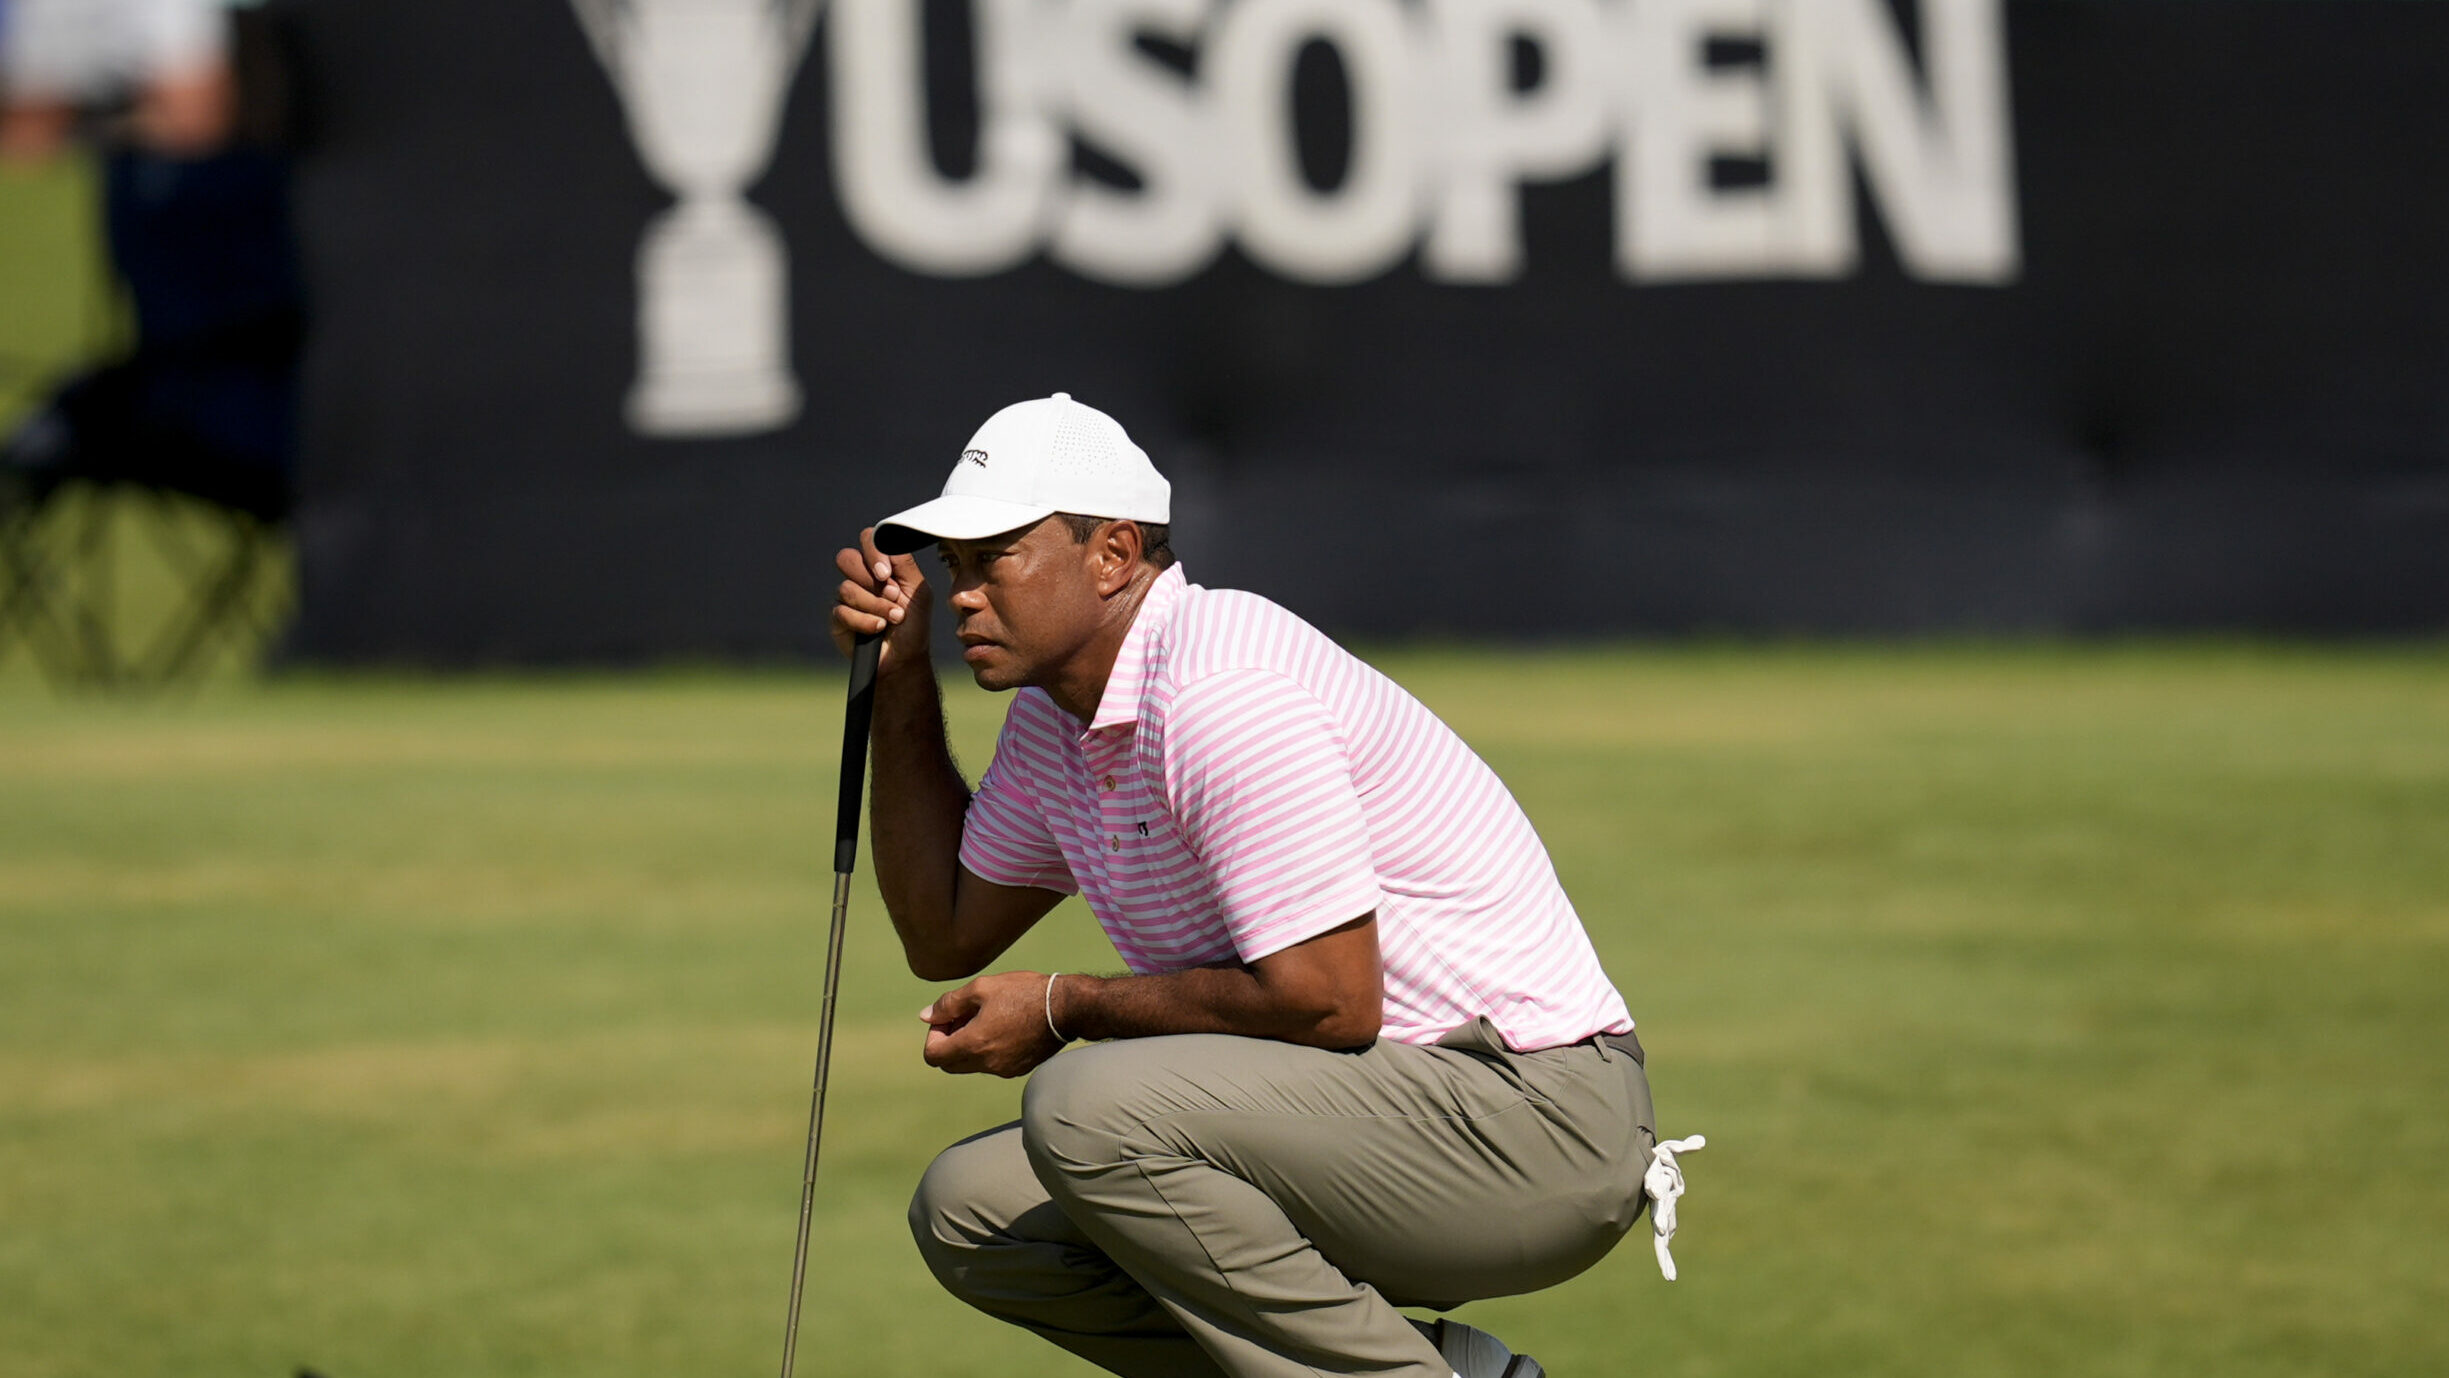 Tiger Woods reads a putt during the opening round of the US Open at Pinehurst